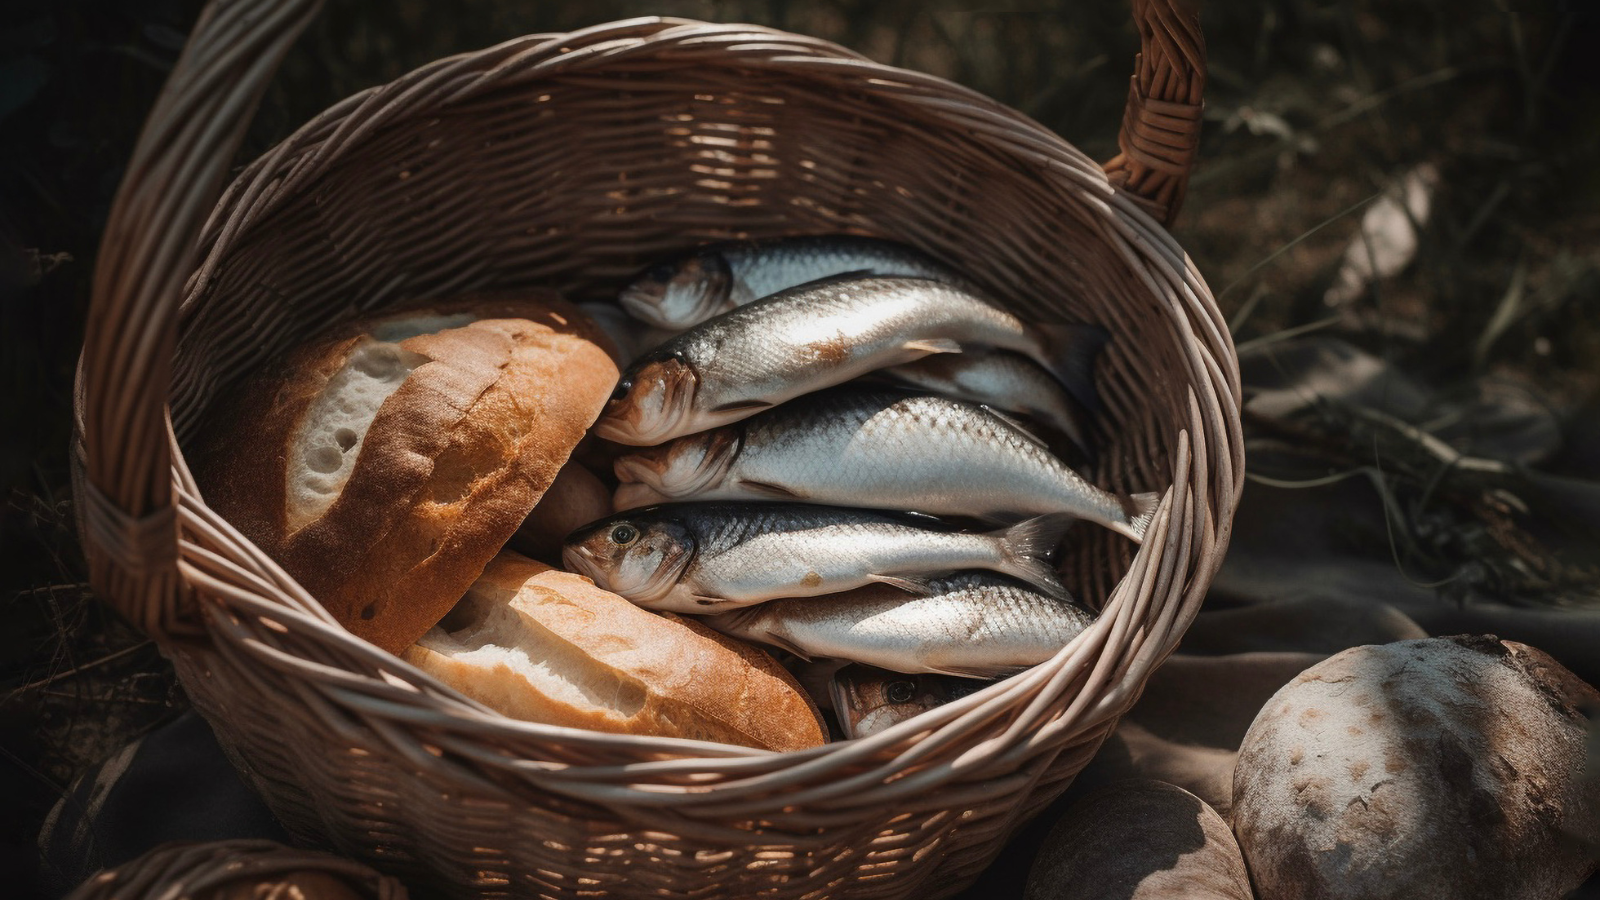 Basket filled with fish and bread